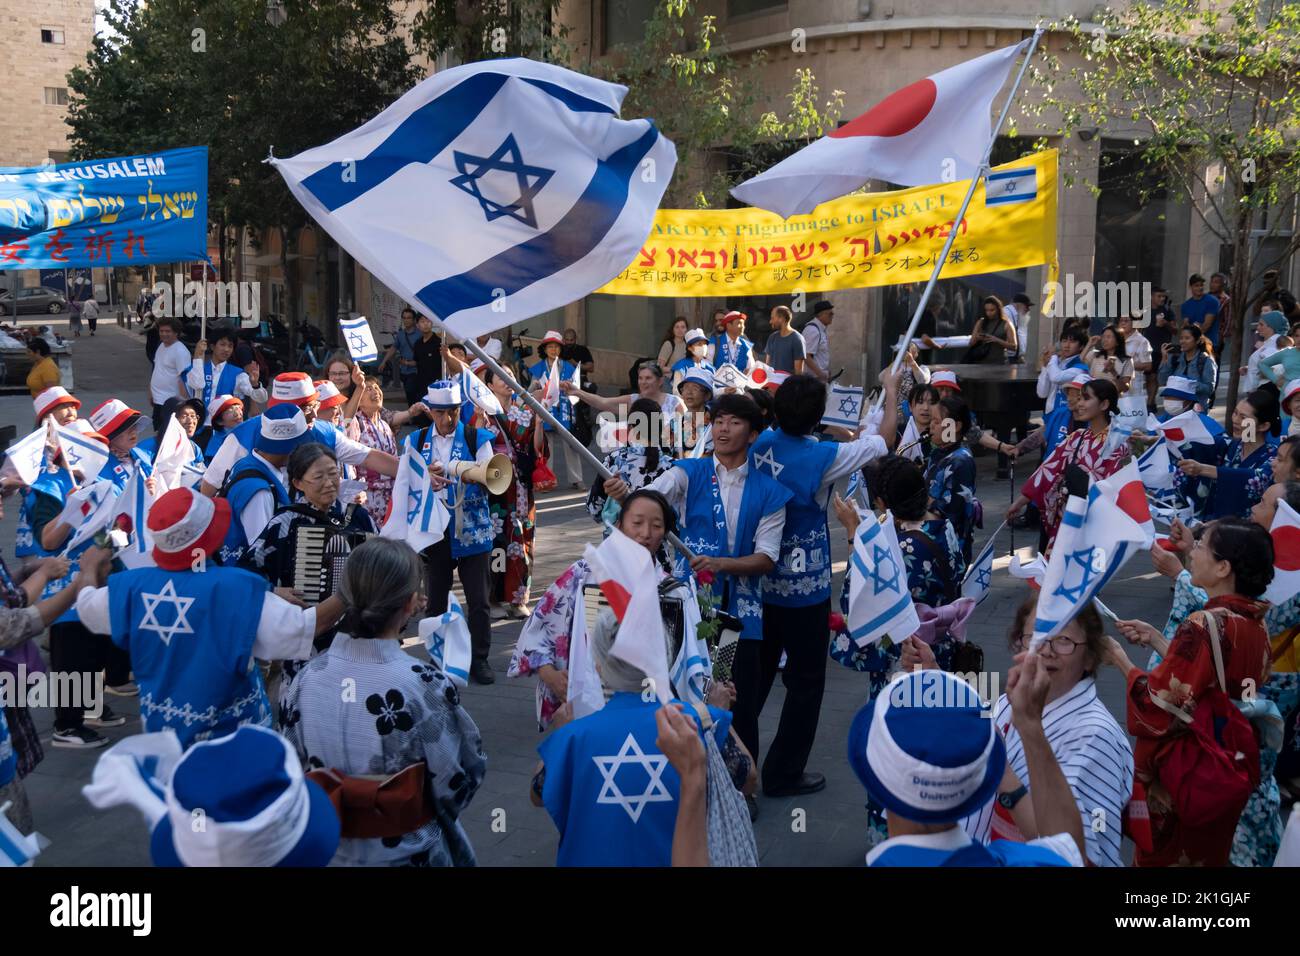 Members of the Japanese Makuya movement dance with the national flags of Israel and Japan in Zion Square on September 18, 2022 in downtown Jerusalem, Israel. The Makuya movement is a religious movement which was founded in 1948 in Japan, Its members are passionate supporters of Israel and consider the establishment of the Jewish state and the unification of Jerusalem 19 years later to be the fulfillment of biblical prophecies. Stock Photo